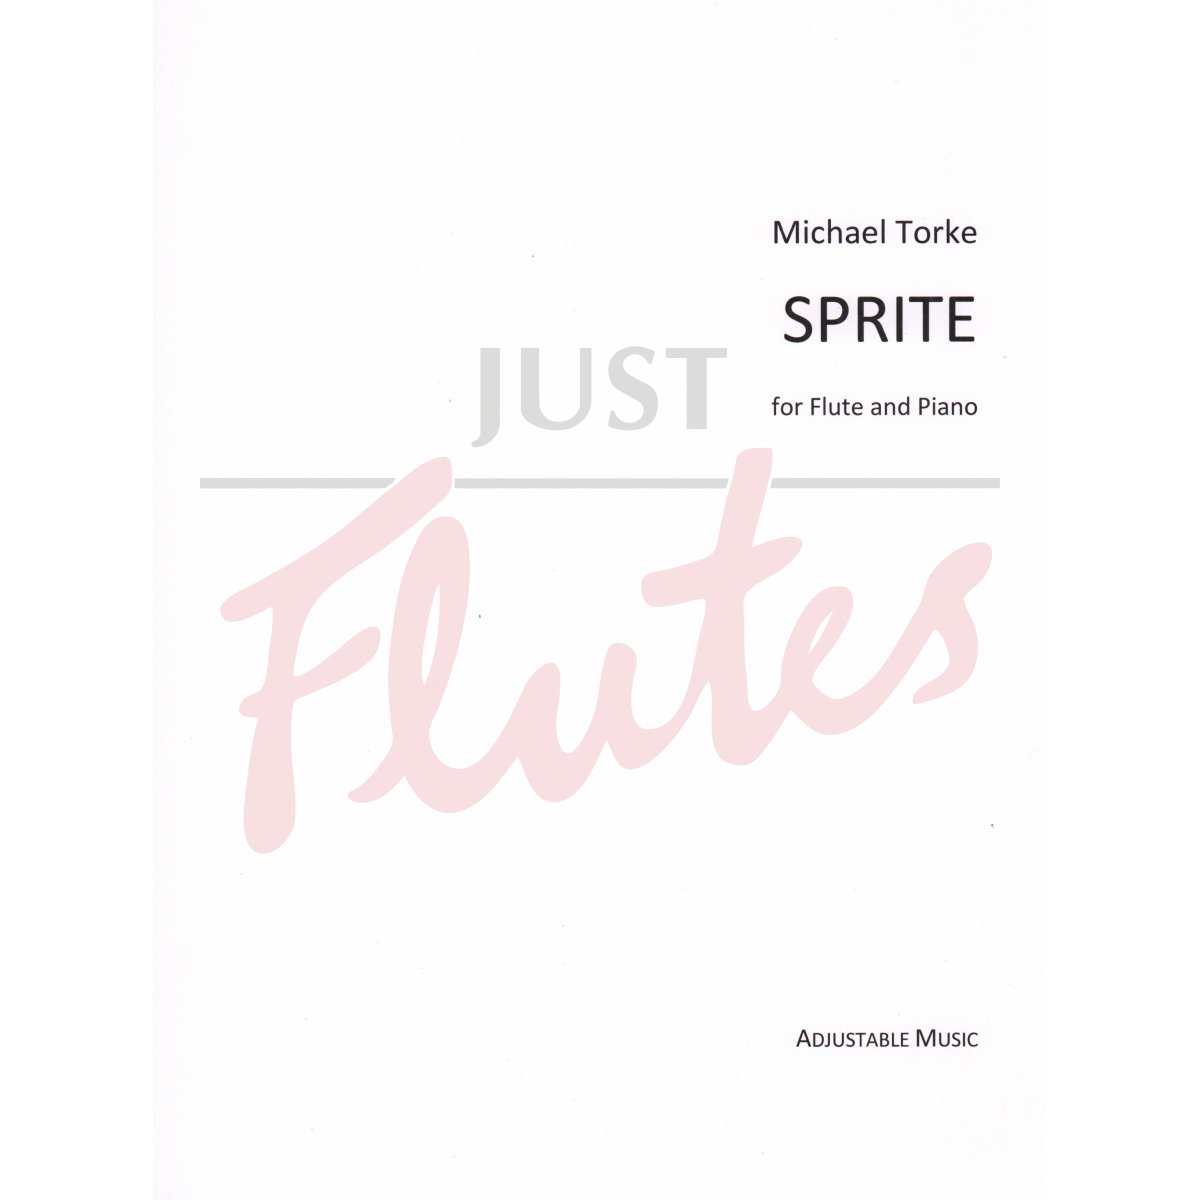 Sprite for Flute and Piano